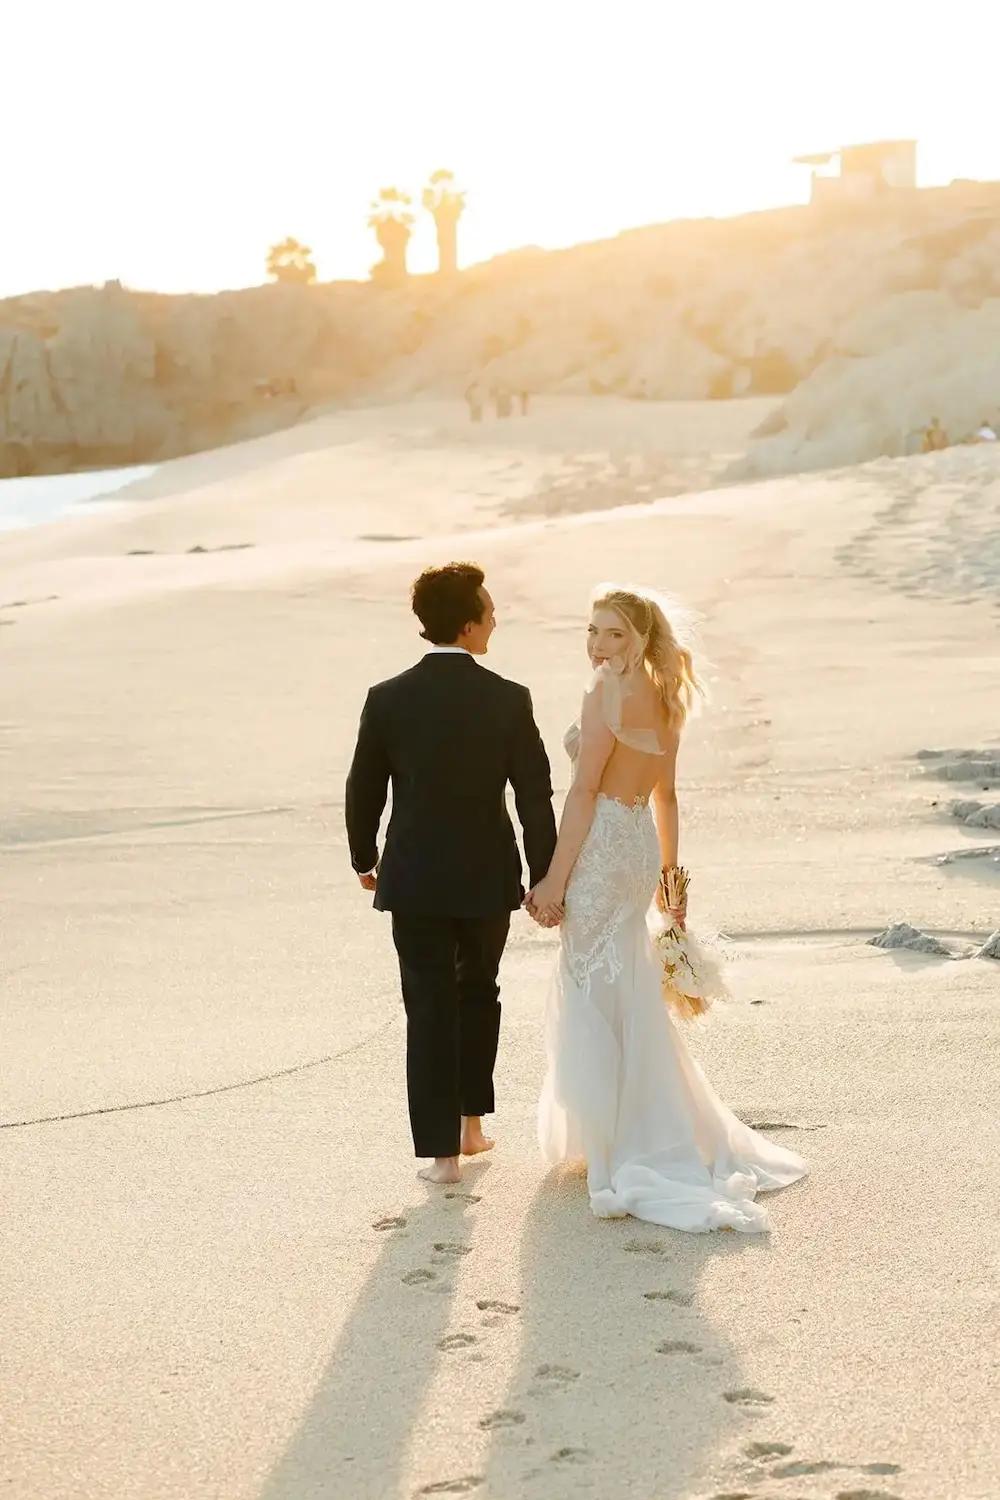 Erica Wears Lace Fit &amp; Flare Bridal Dress for Destination Beach Wedding in Cabo. Mobile Image